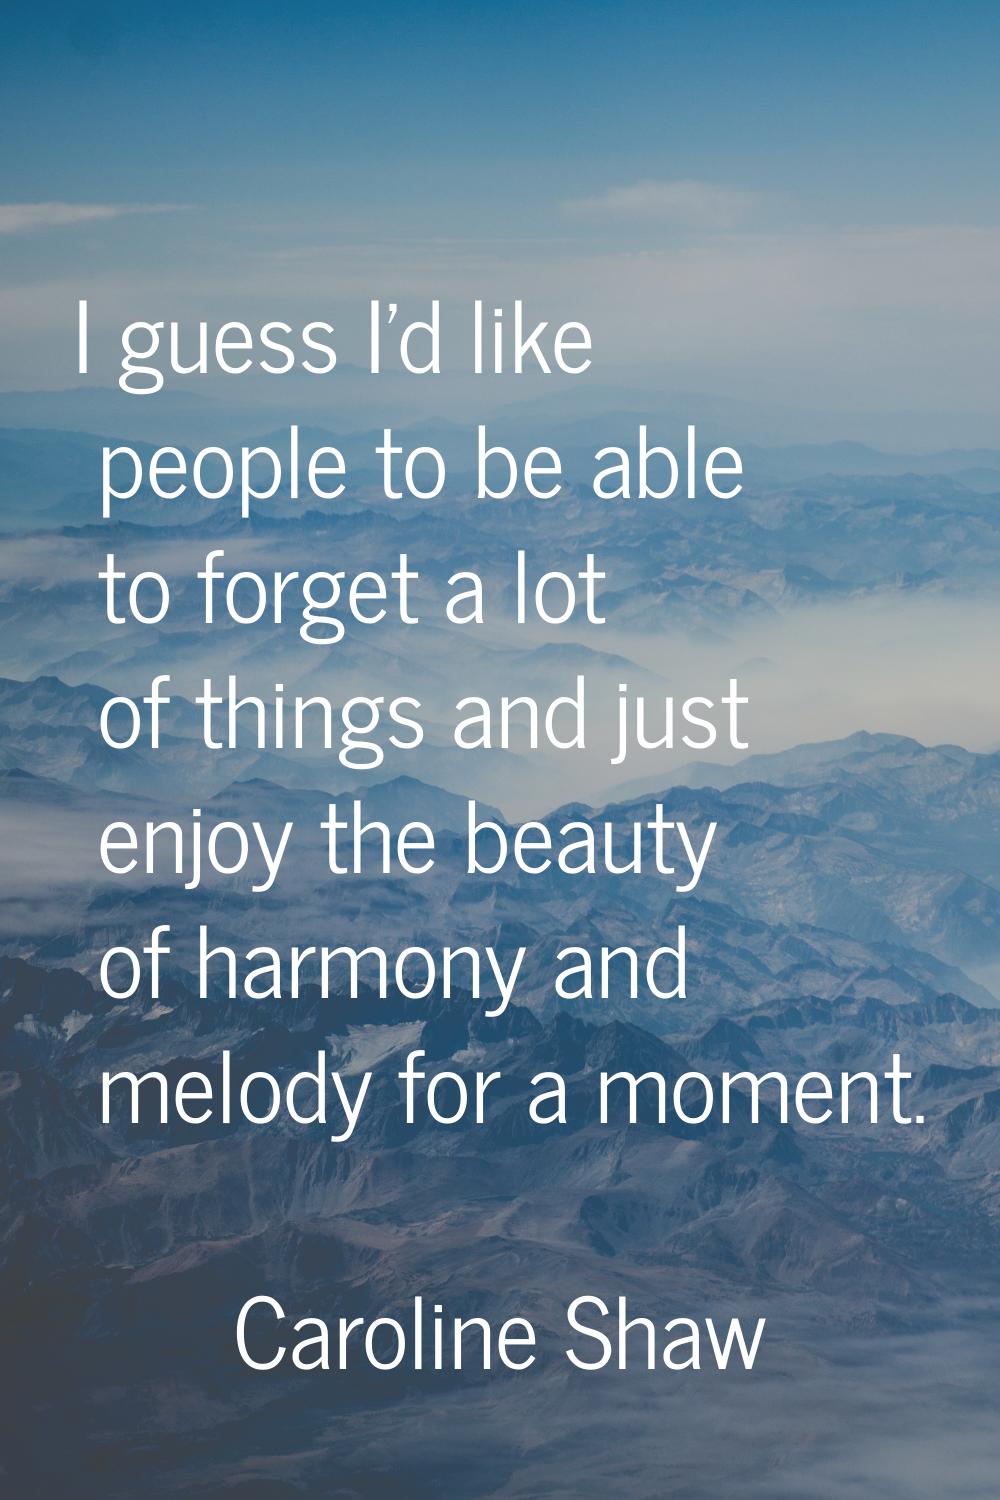 I guess I'd like people to be able to forget a lot of things and just enjoy the beauty of harmony a